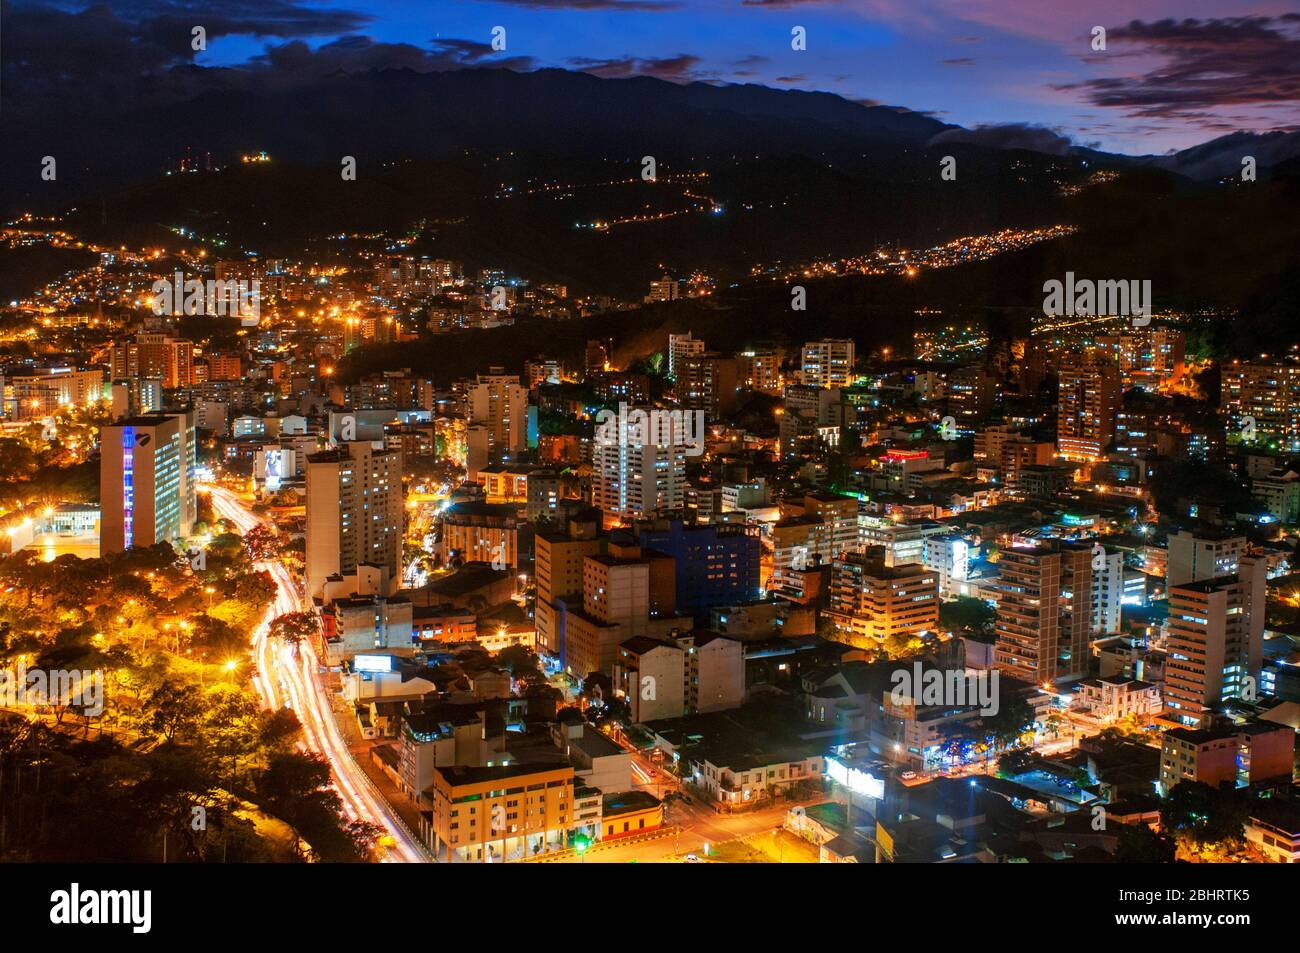 View from Cali Tower.  CAM Centro Administrativo Municipal. Cali town hall. Cali city in the Cauca Valley, Colombia, South America. Stock Photo